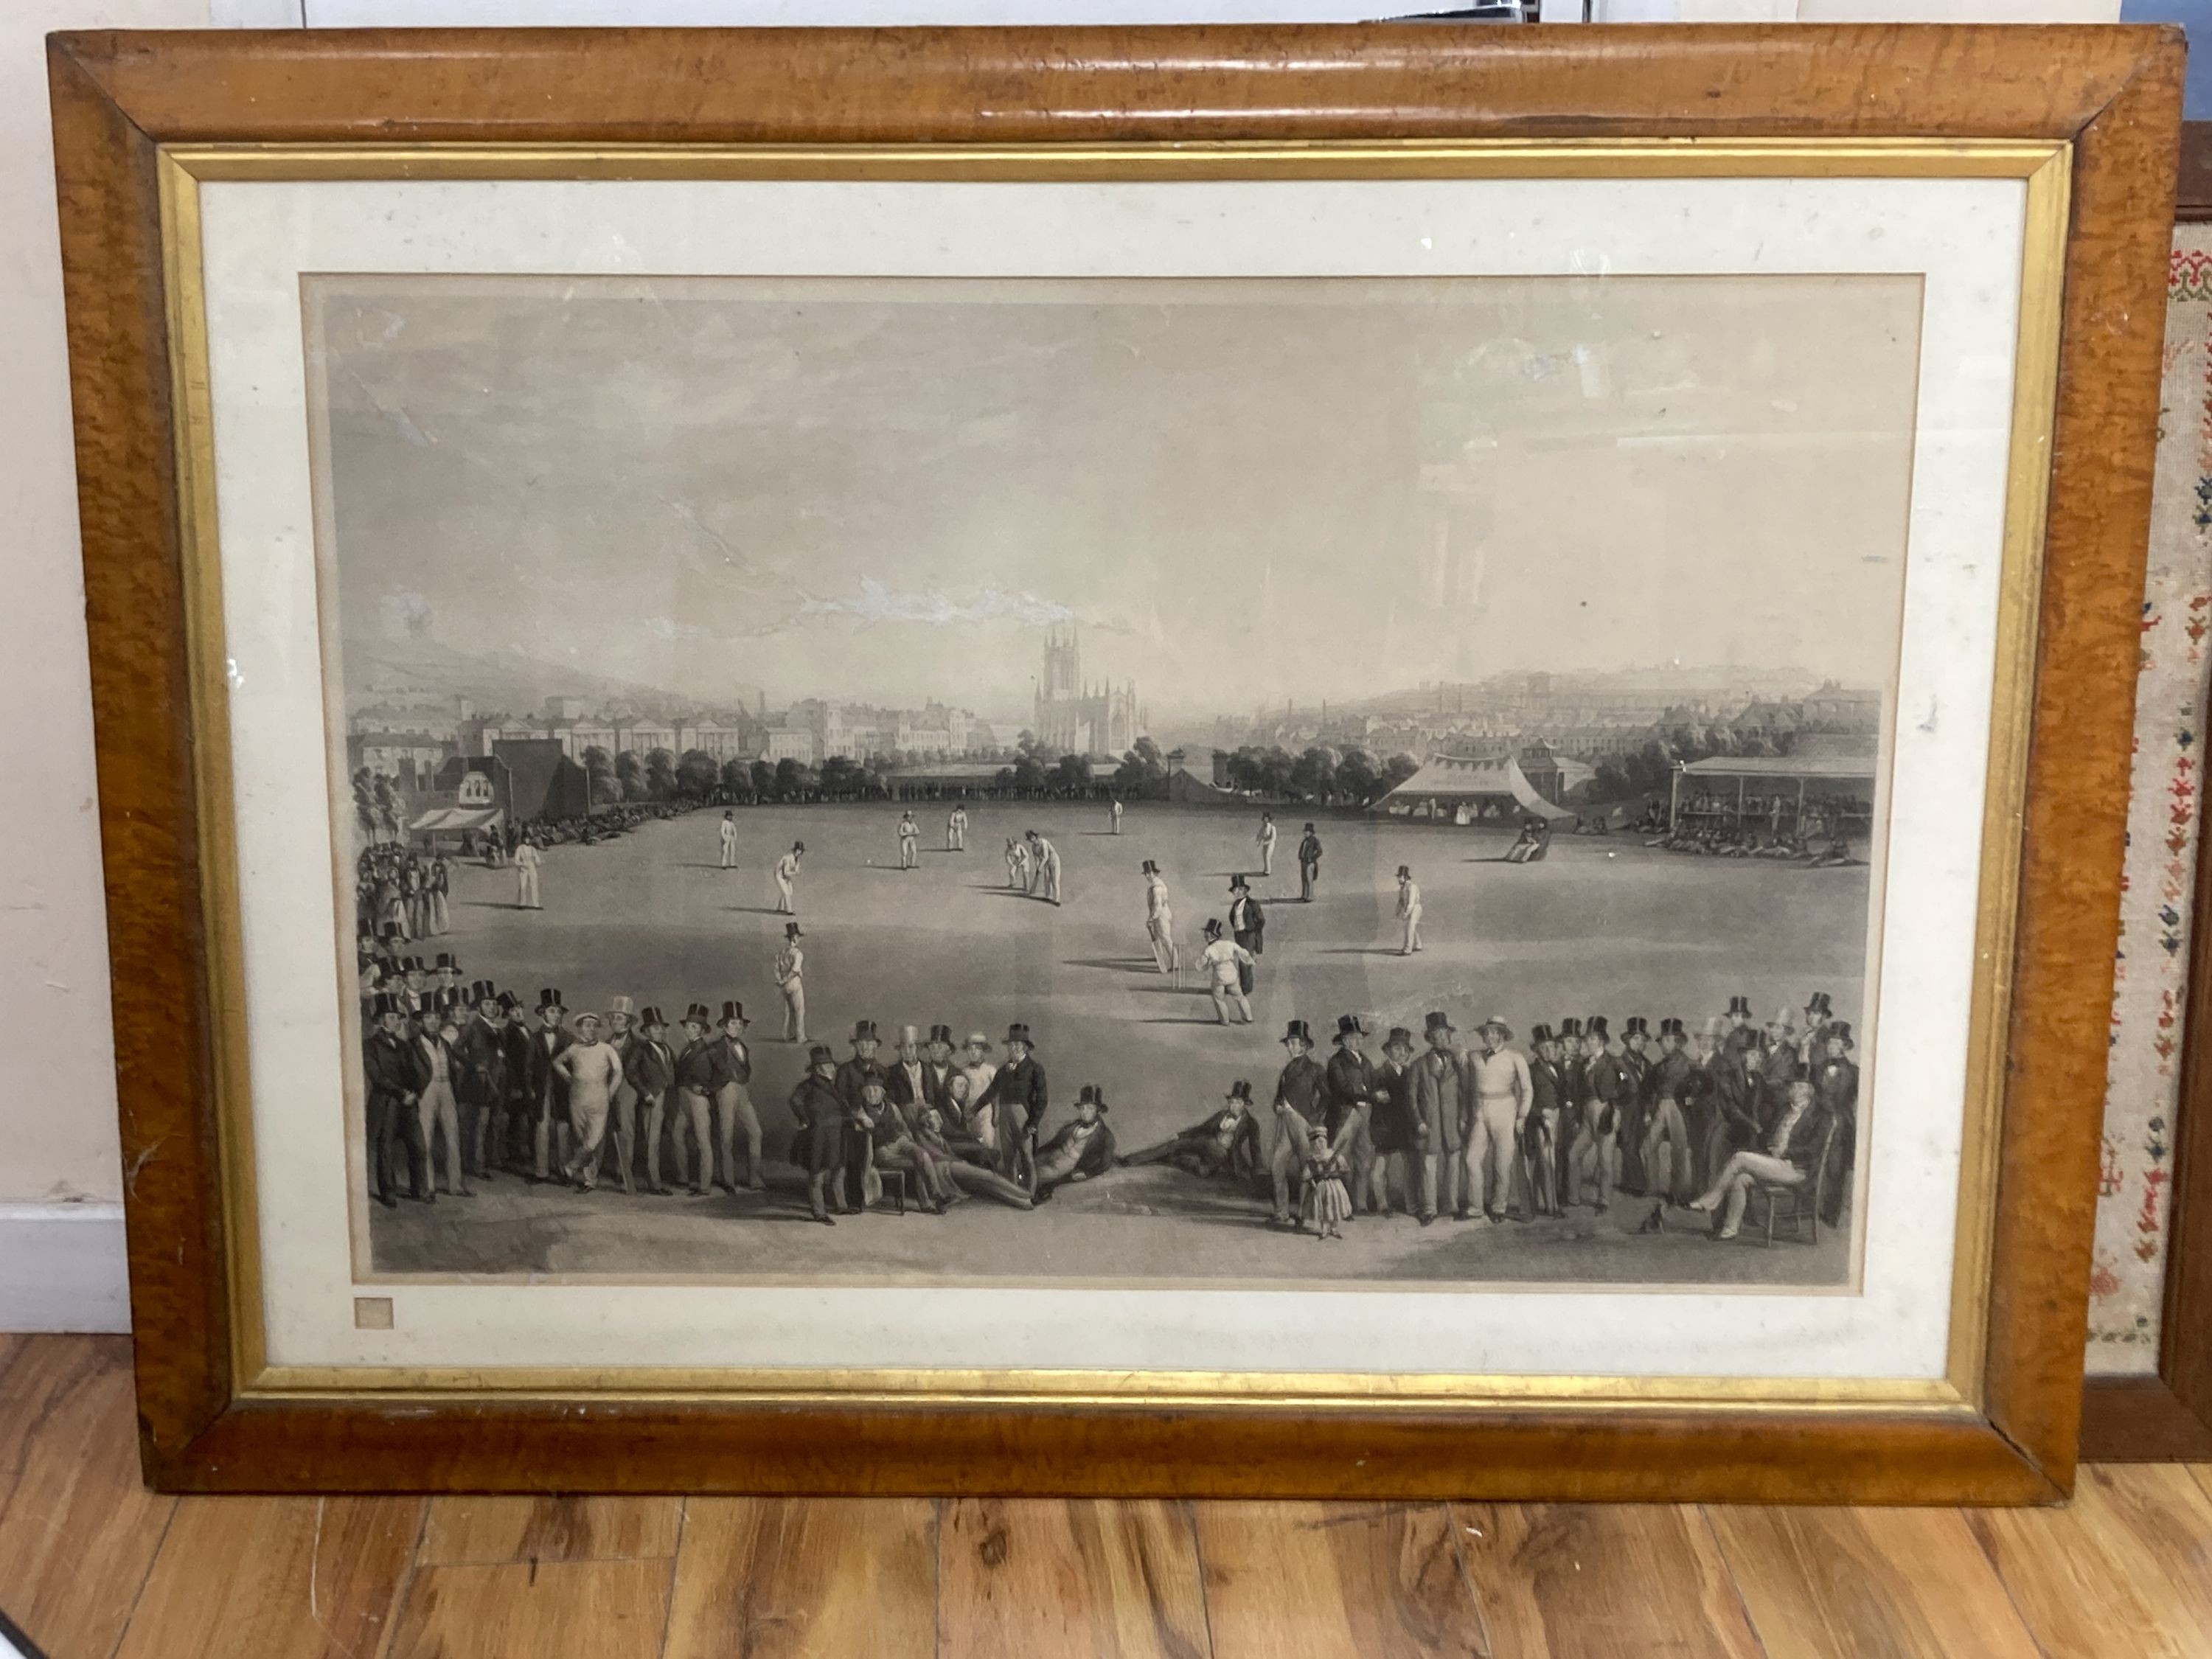 Phillips after Drummond and Basebe, lithograph, The cricket match between Sussex and Kent at Hove, Sussex, 62 x 92cm.